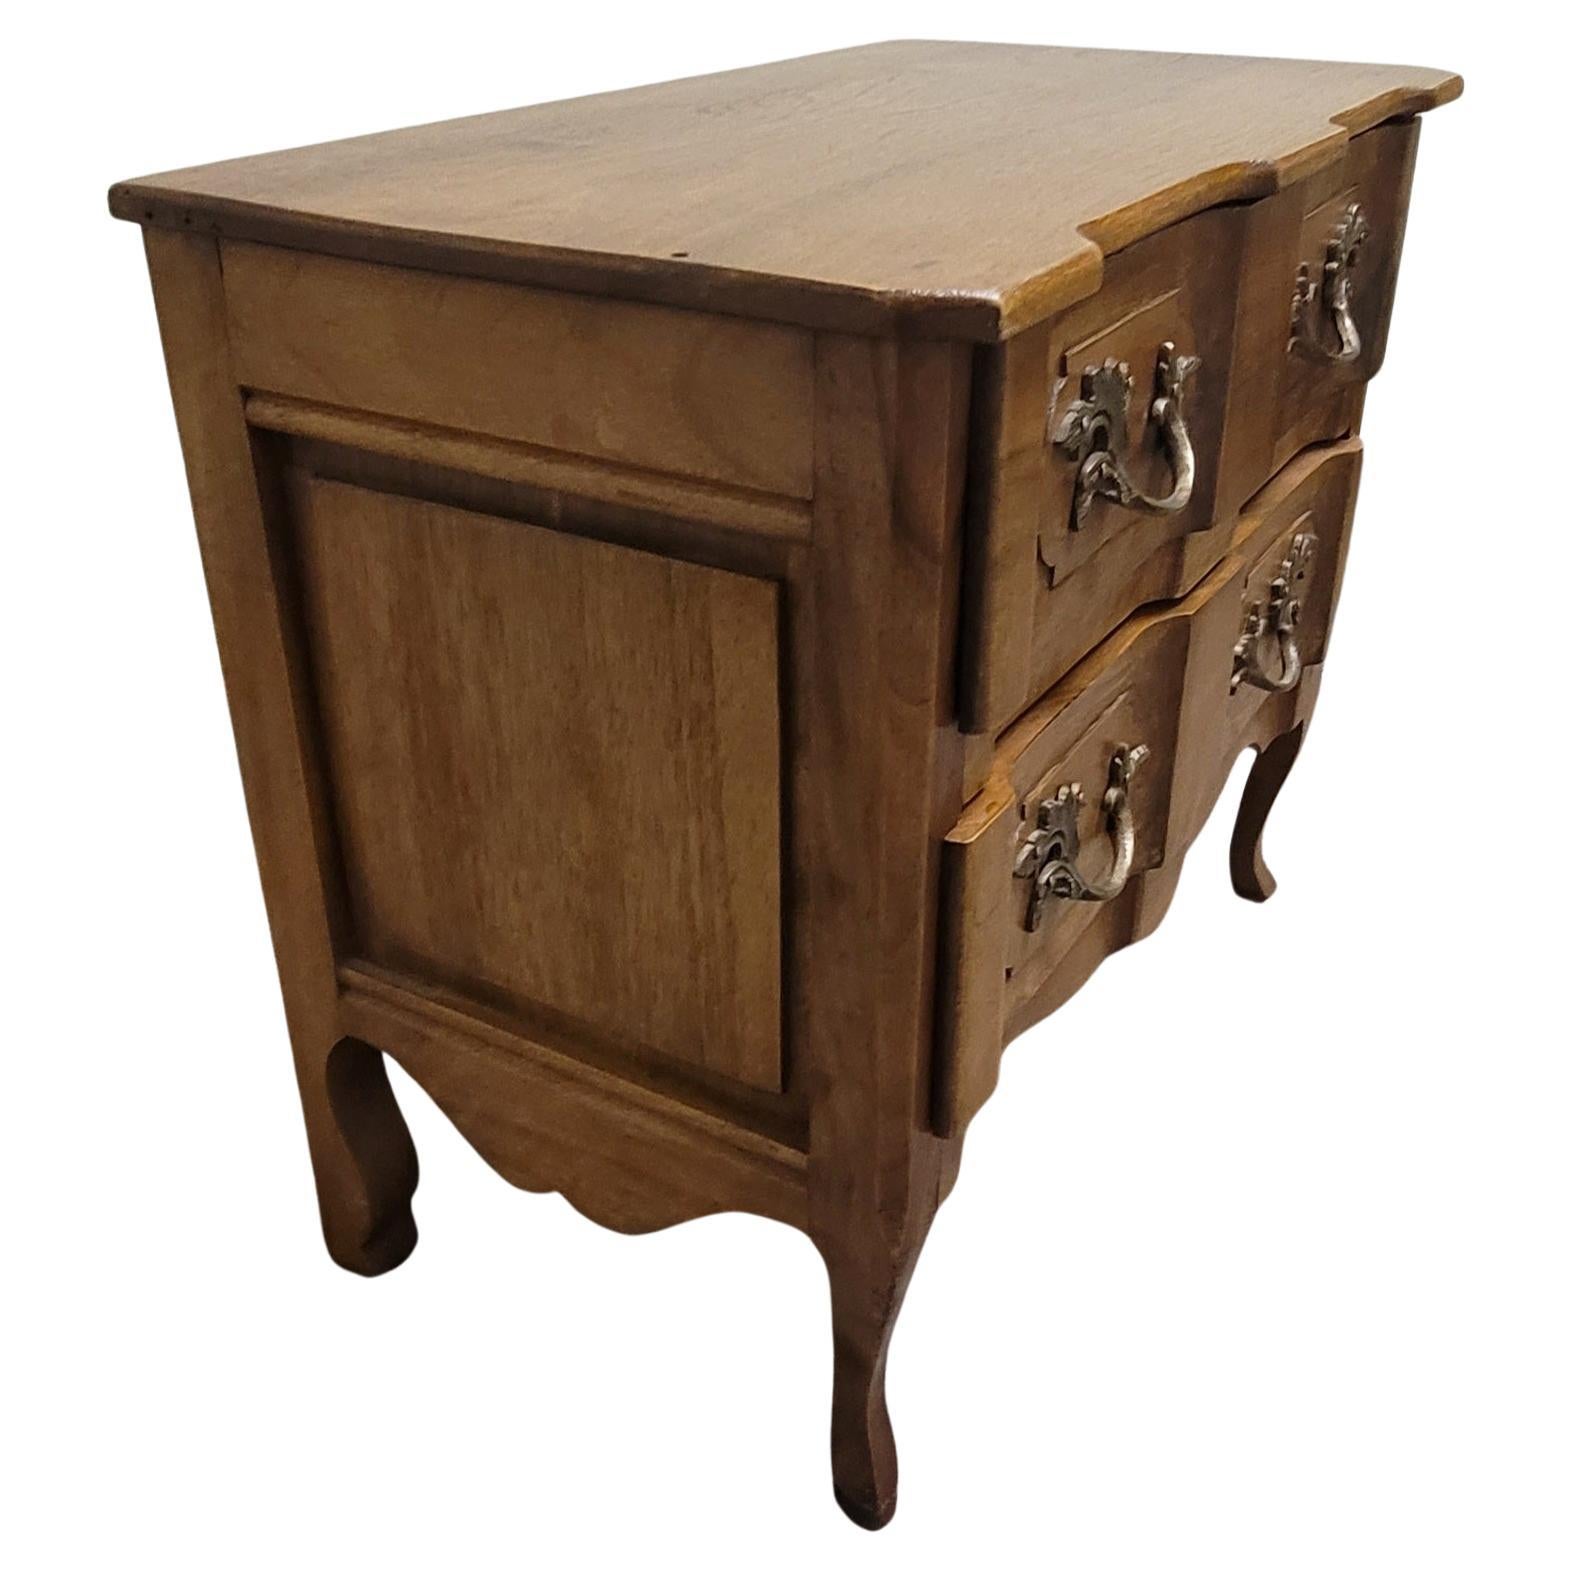 20th Century Hand-Crafted French Provincial Walnut Diminutive Commode w/ Hand-Rubbed Finish For Sale